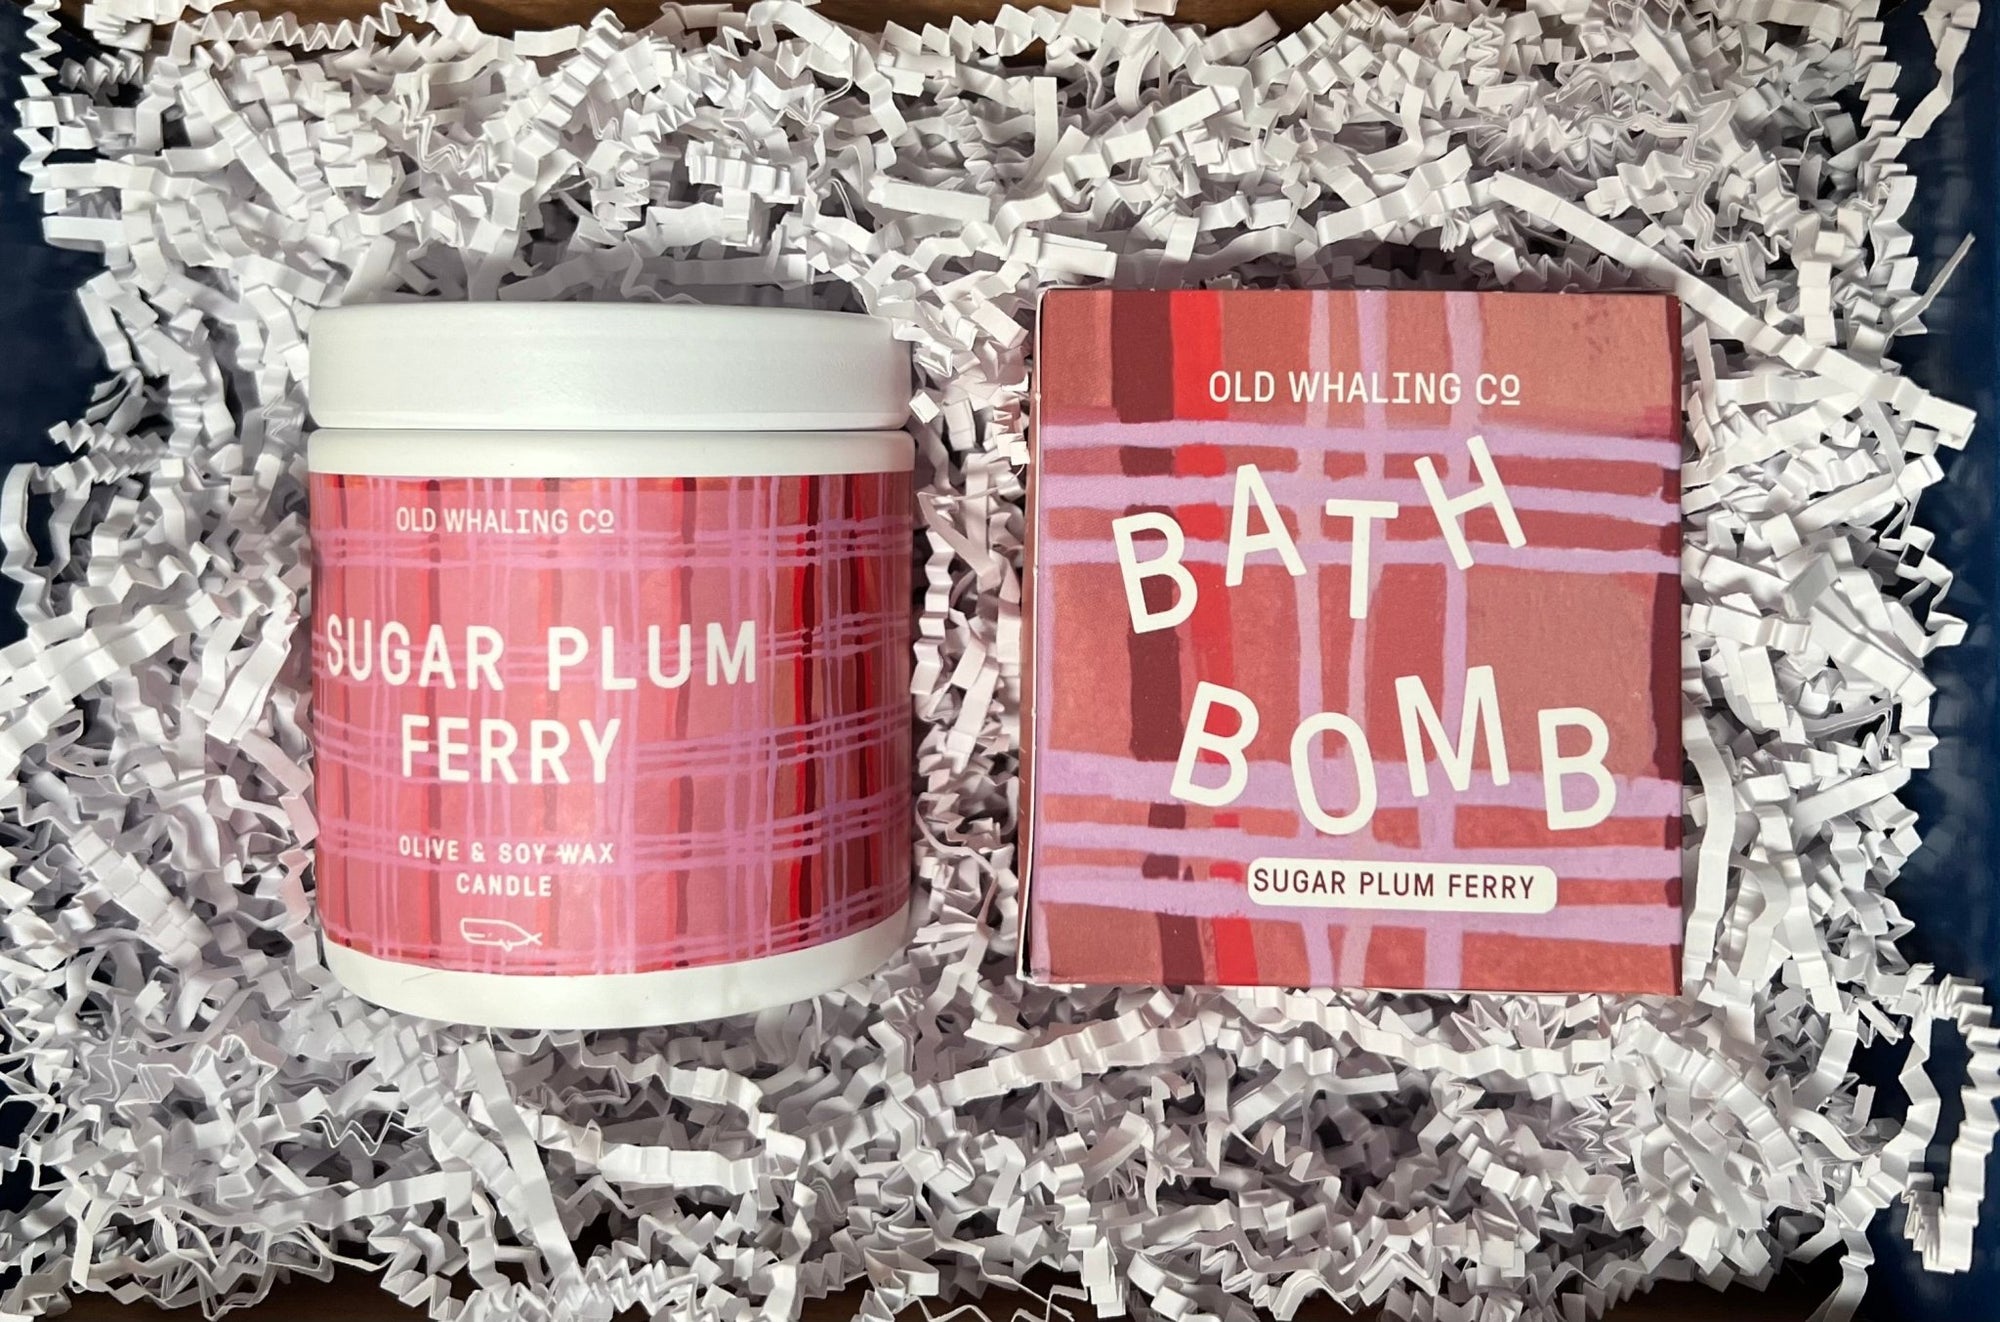 Perfect Pair: Old Whaling Co. Sugar Plum Ferry Candle + Bath Bomb - Essentially Charleston